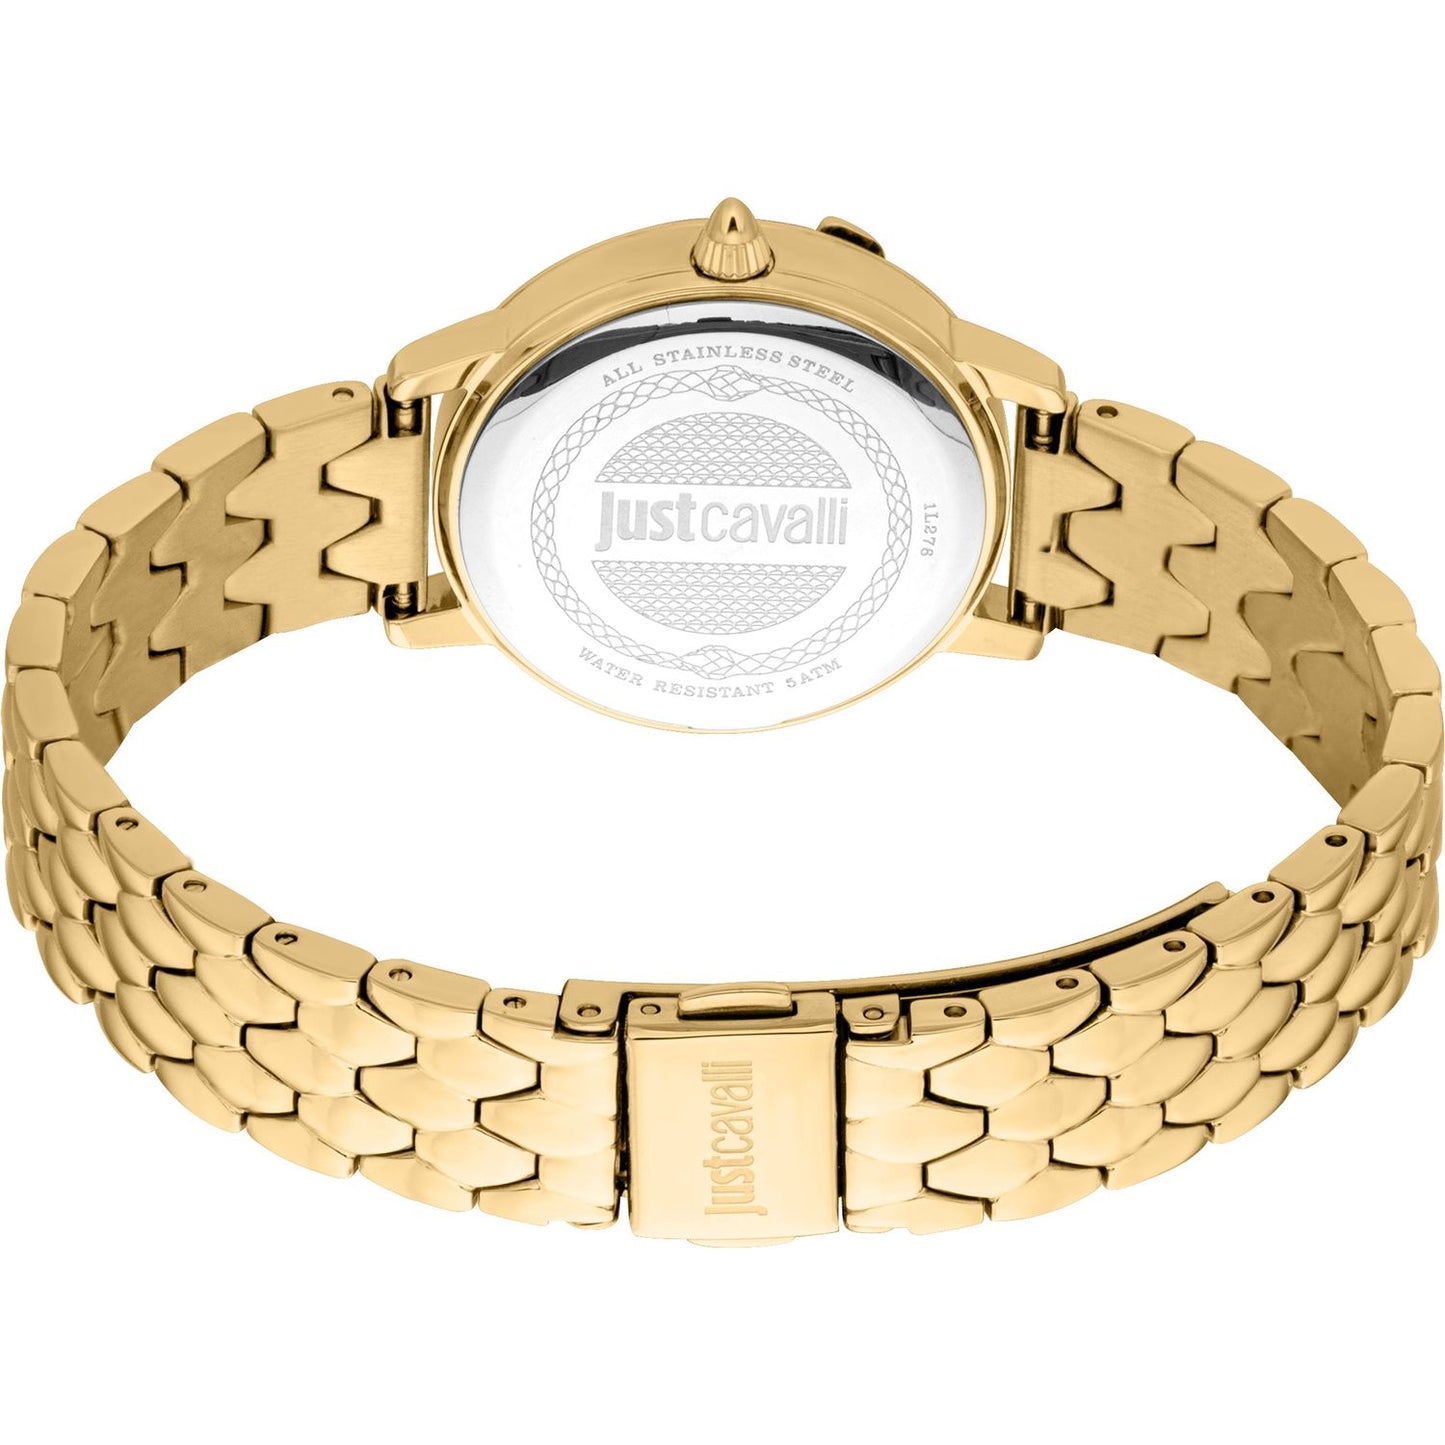 JUST CAVALLI TIME JUST CAVALLI TIME Mod. FIDENZA 2023-24 COLLECTION WATCHES just-cavalli-time-mod-fidenza-2023-24-collection-4